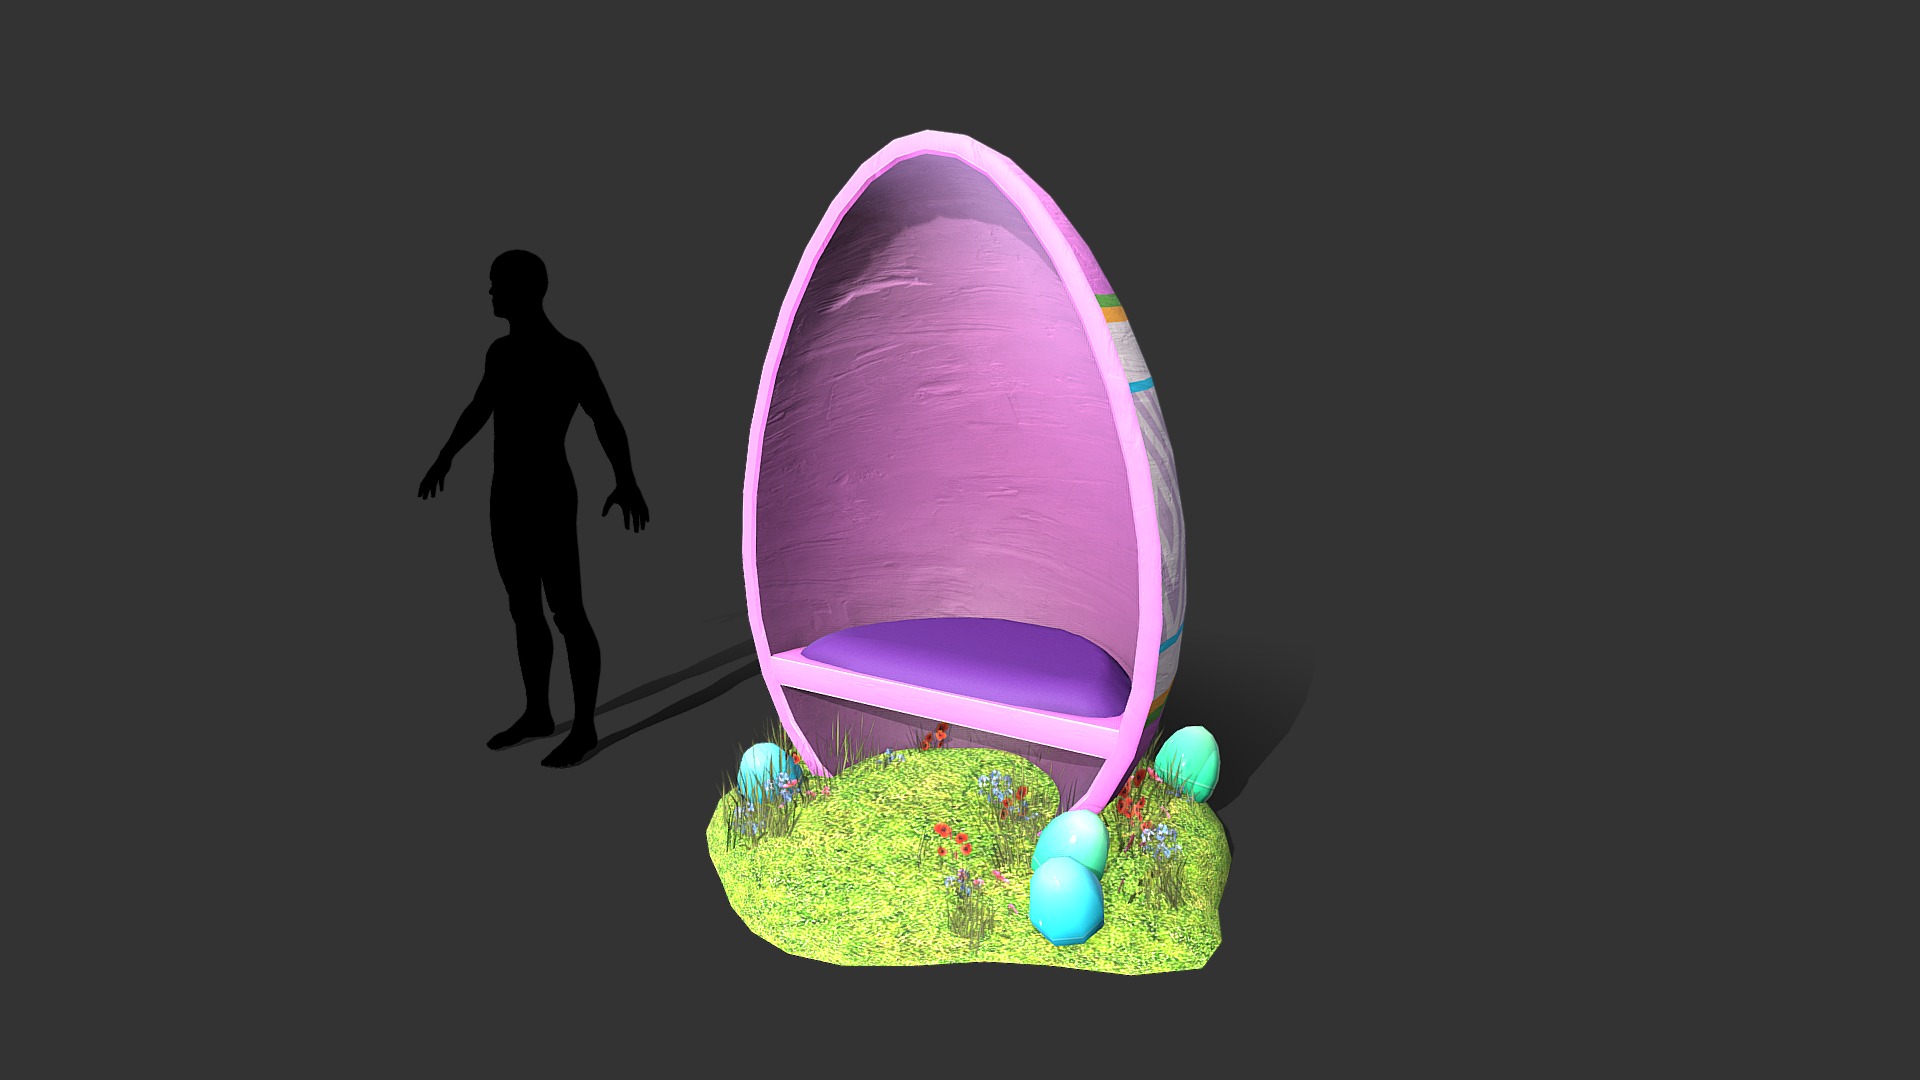 Great Easter Throne deco - Easter Egg Throne Deco - 3D model by TonyGalindo3d 3d model